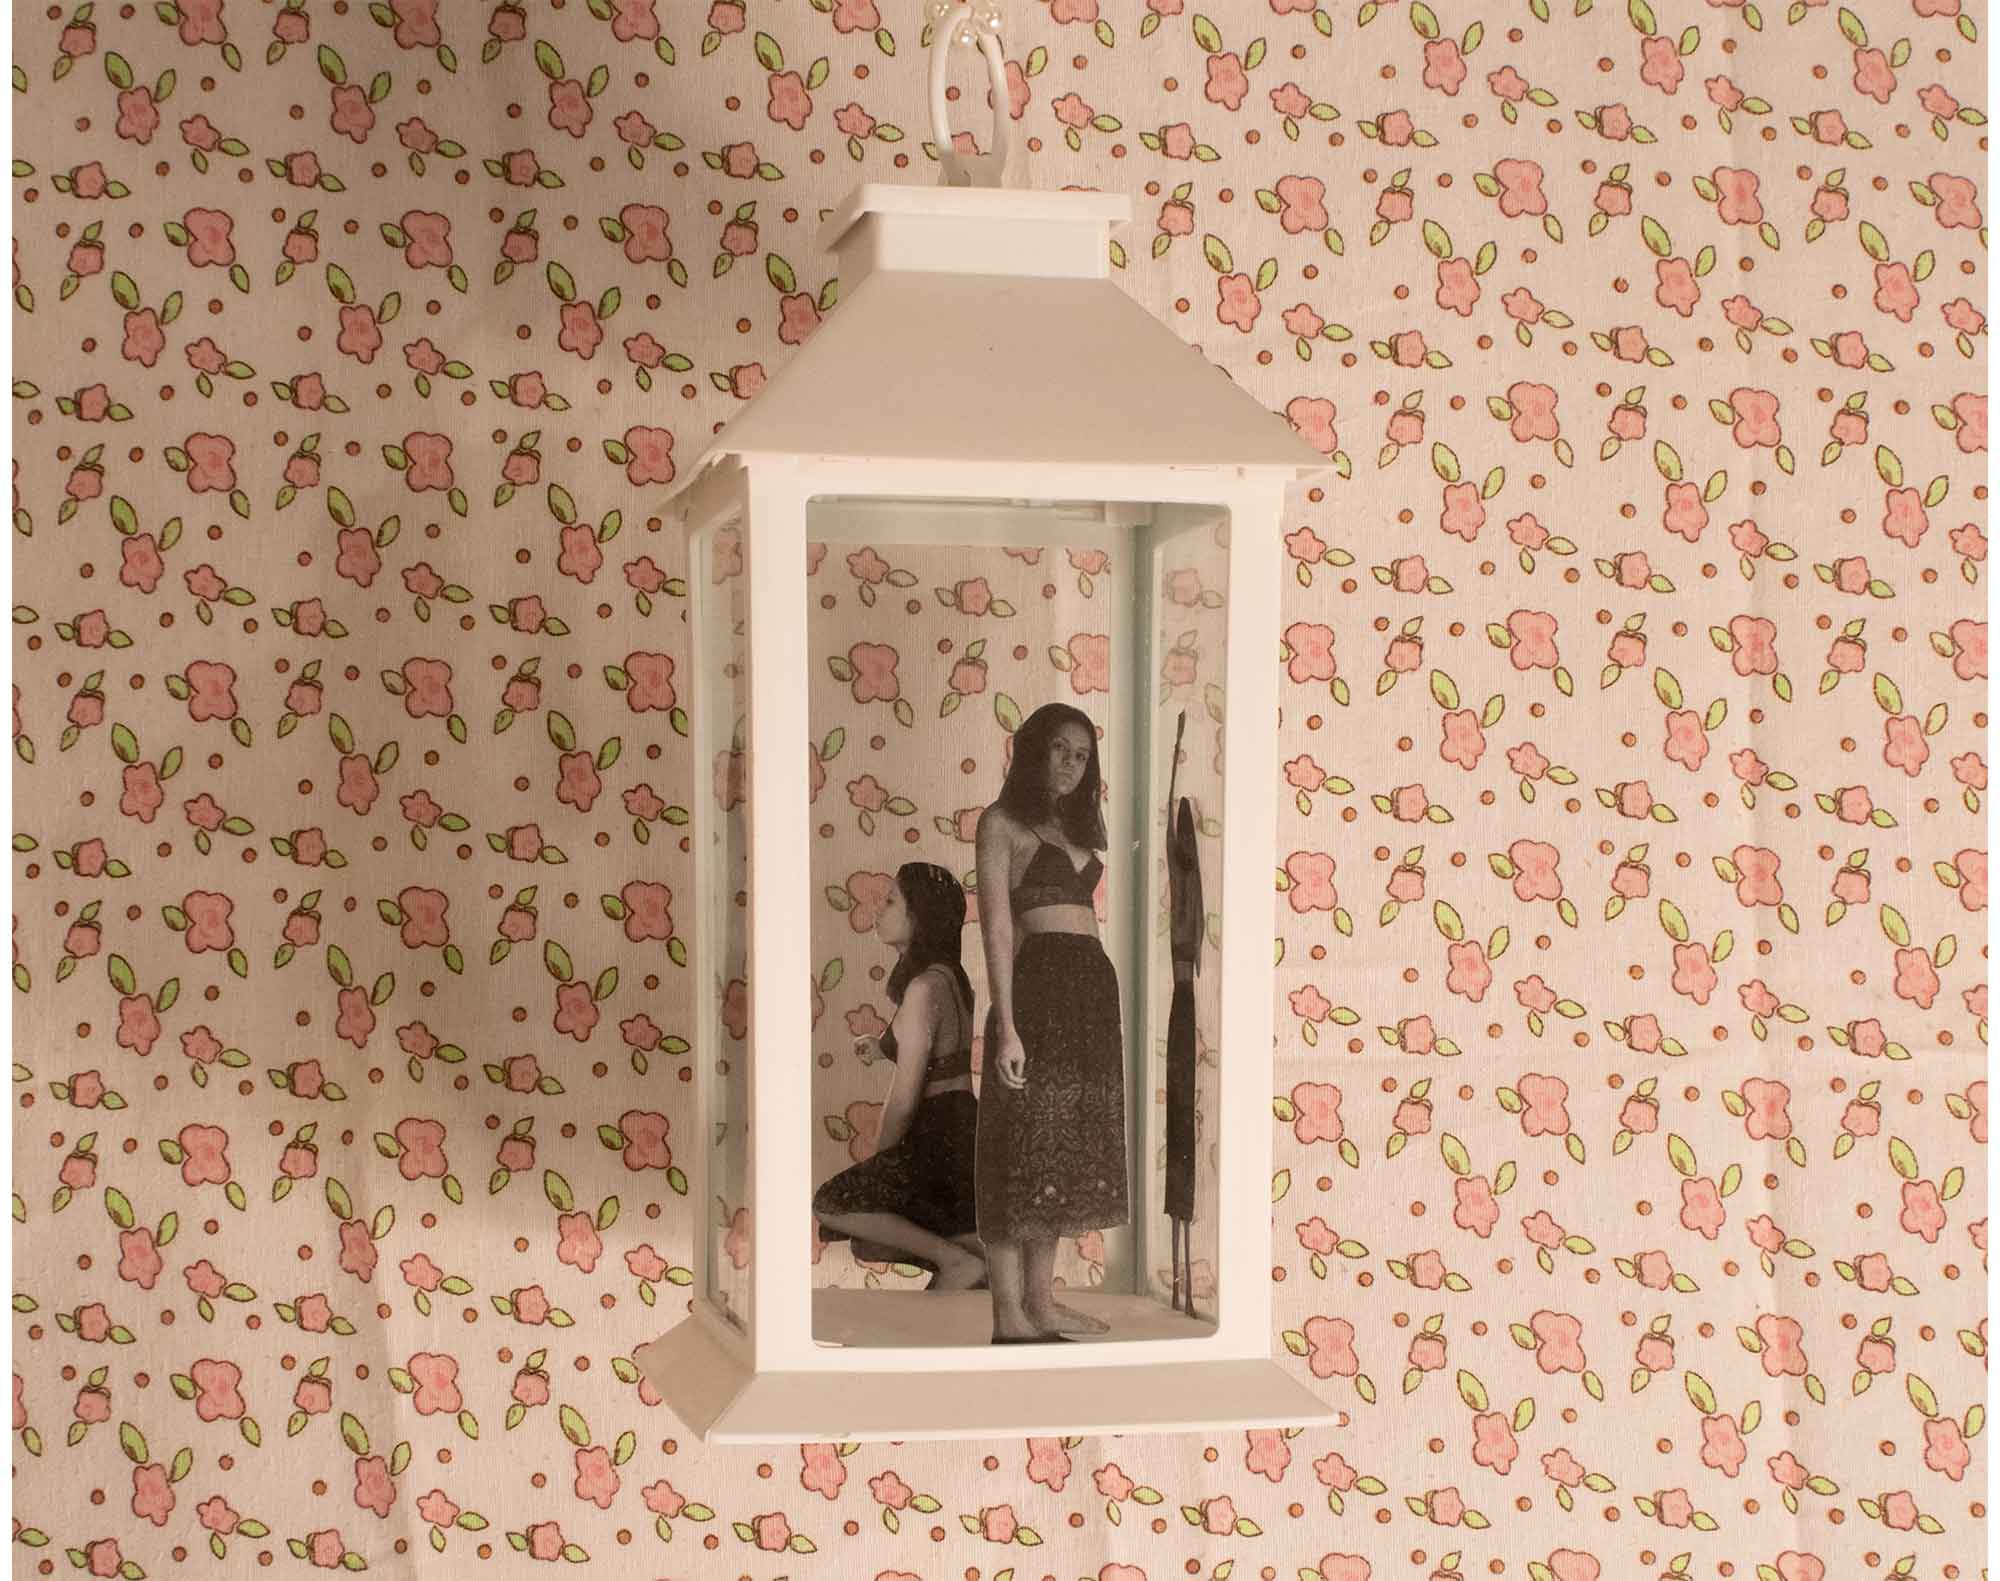 Black and white self portrait pasted inside each panel of a white plastic lantern hanging in front of a pink striped flower pattern.